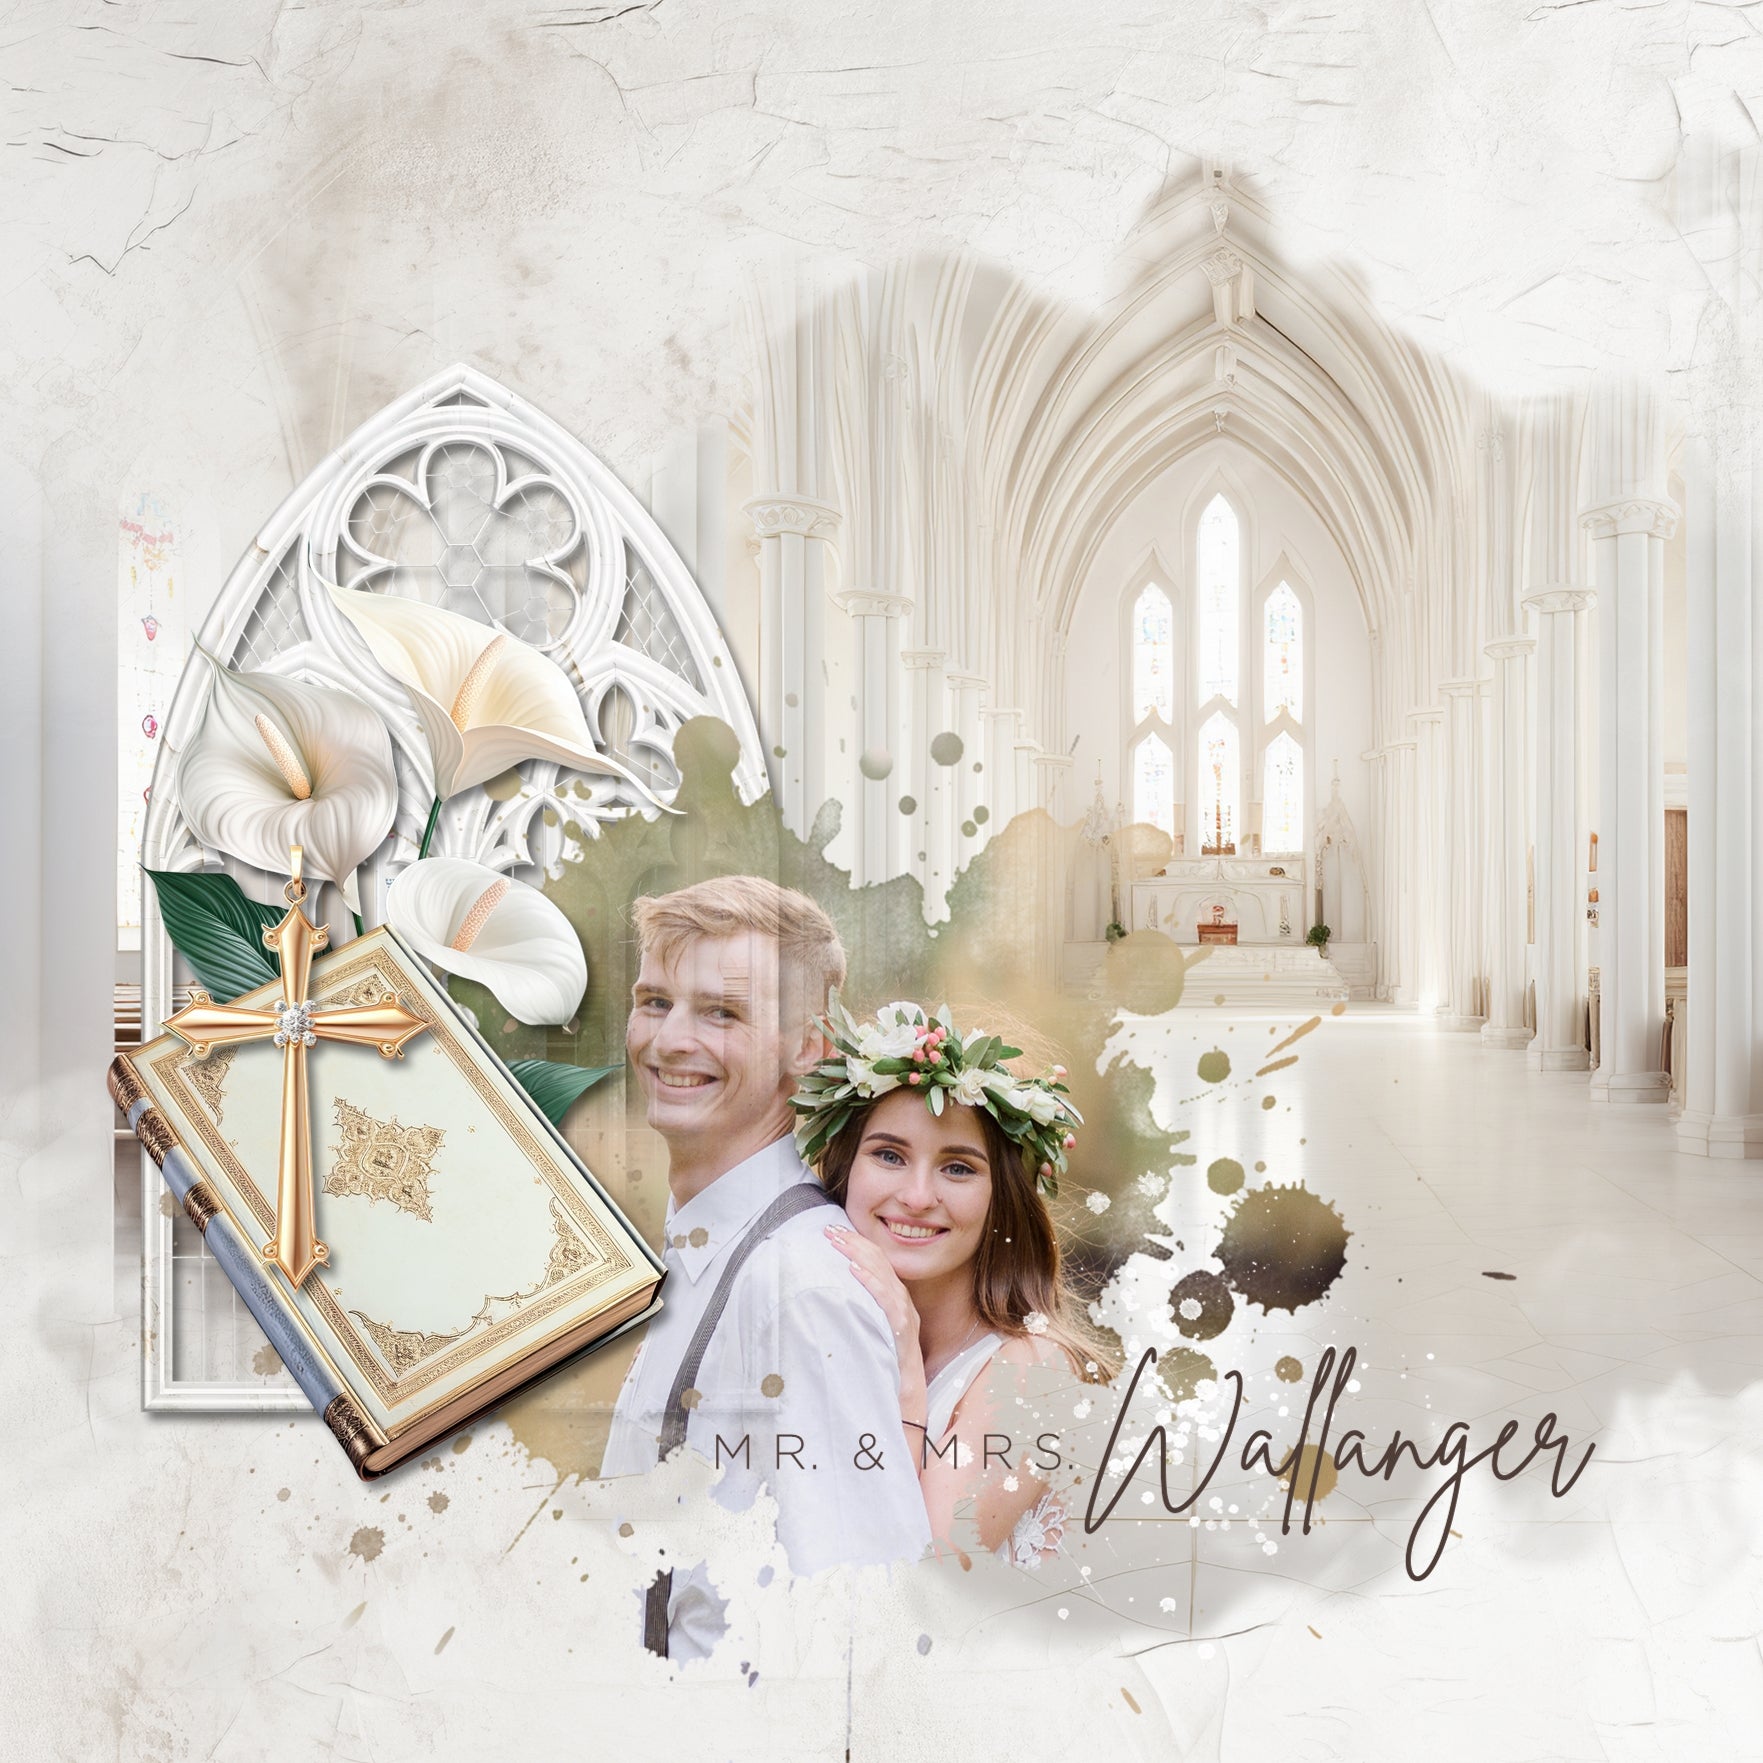 These beautiful and realistic digital scrapbooking embellishments by Lucky Girl Creative Digital Art are the perfect addition to any page or album featuring church, faith, religion, wedding, baptism, communion, choir, and other historic sites such as basilicas, cathedrals, temples, and chapels.